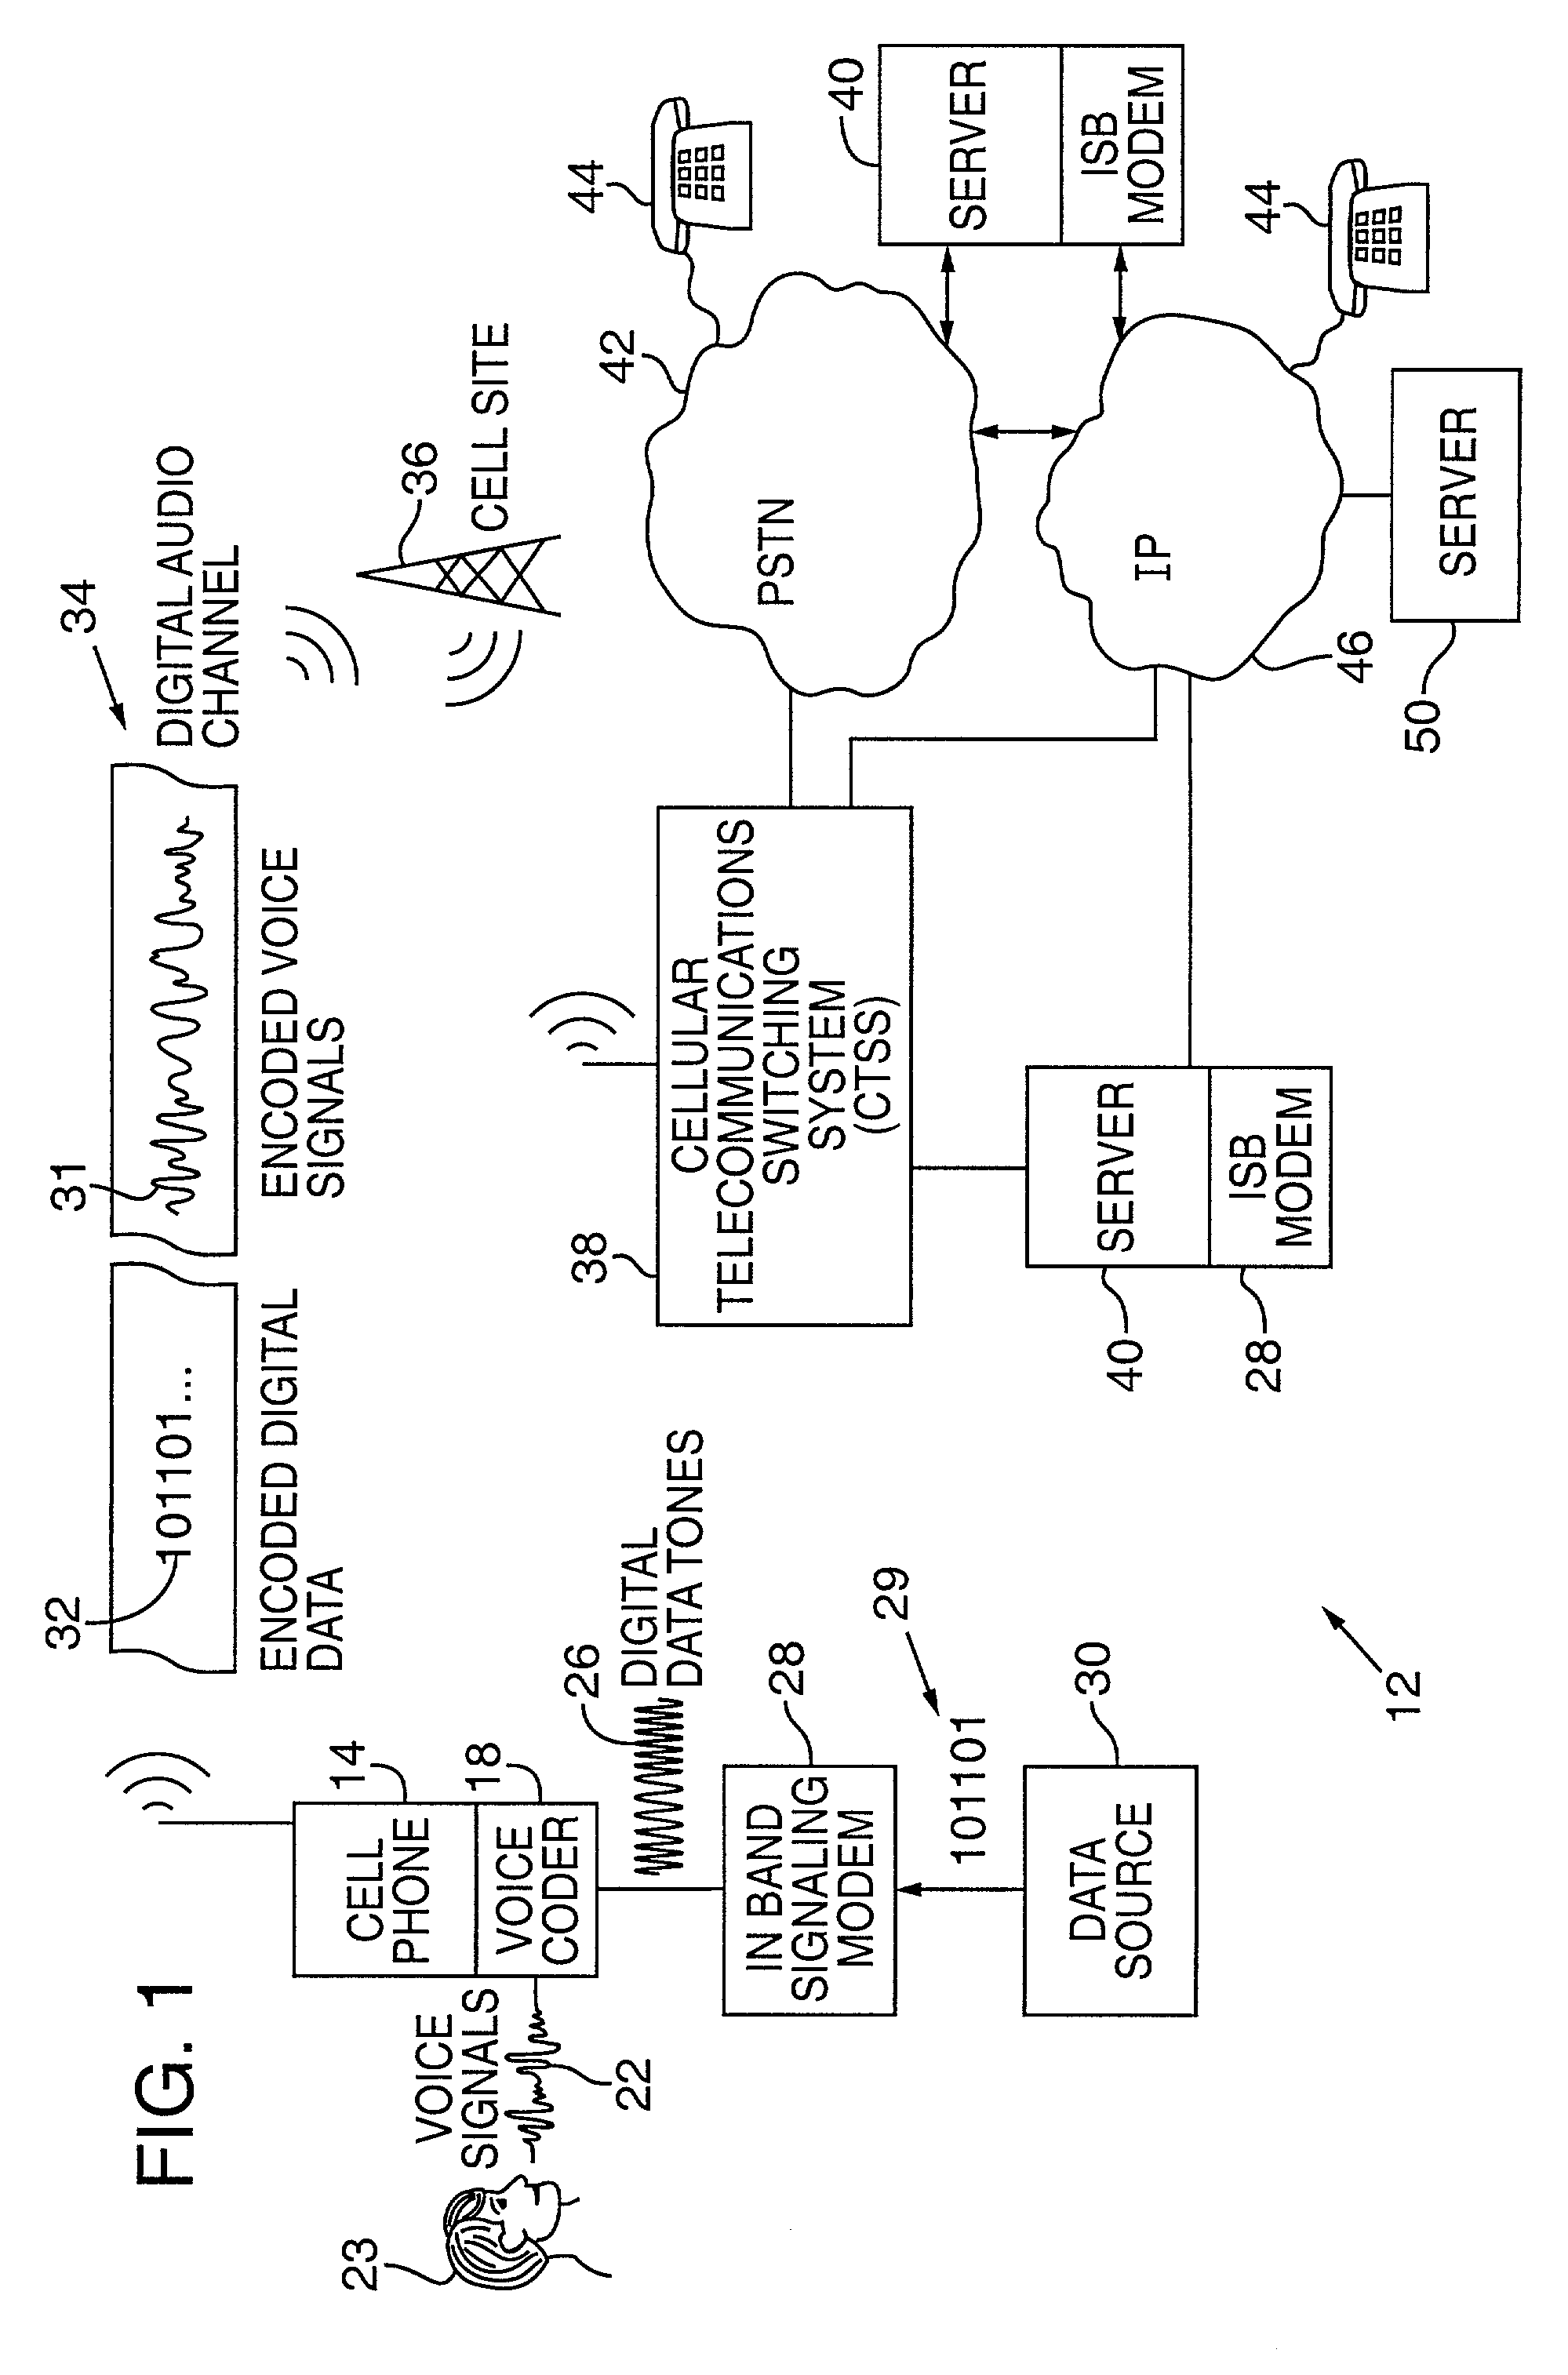 Software code for improved in-band signaling for data communications over digital wireless telecommunications networks